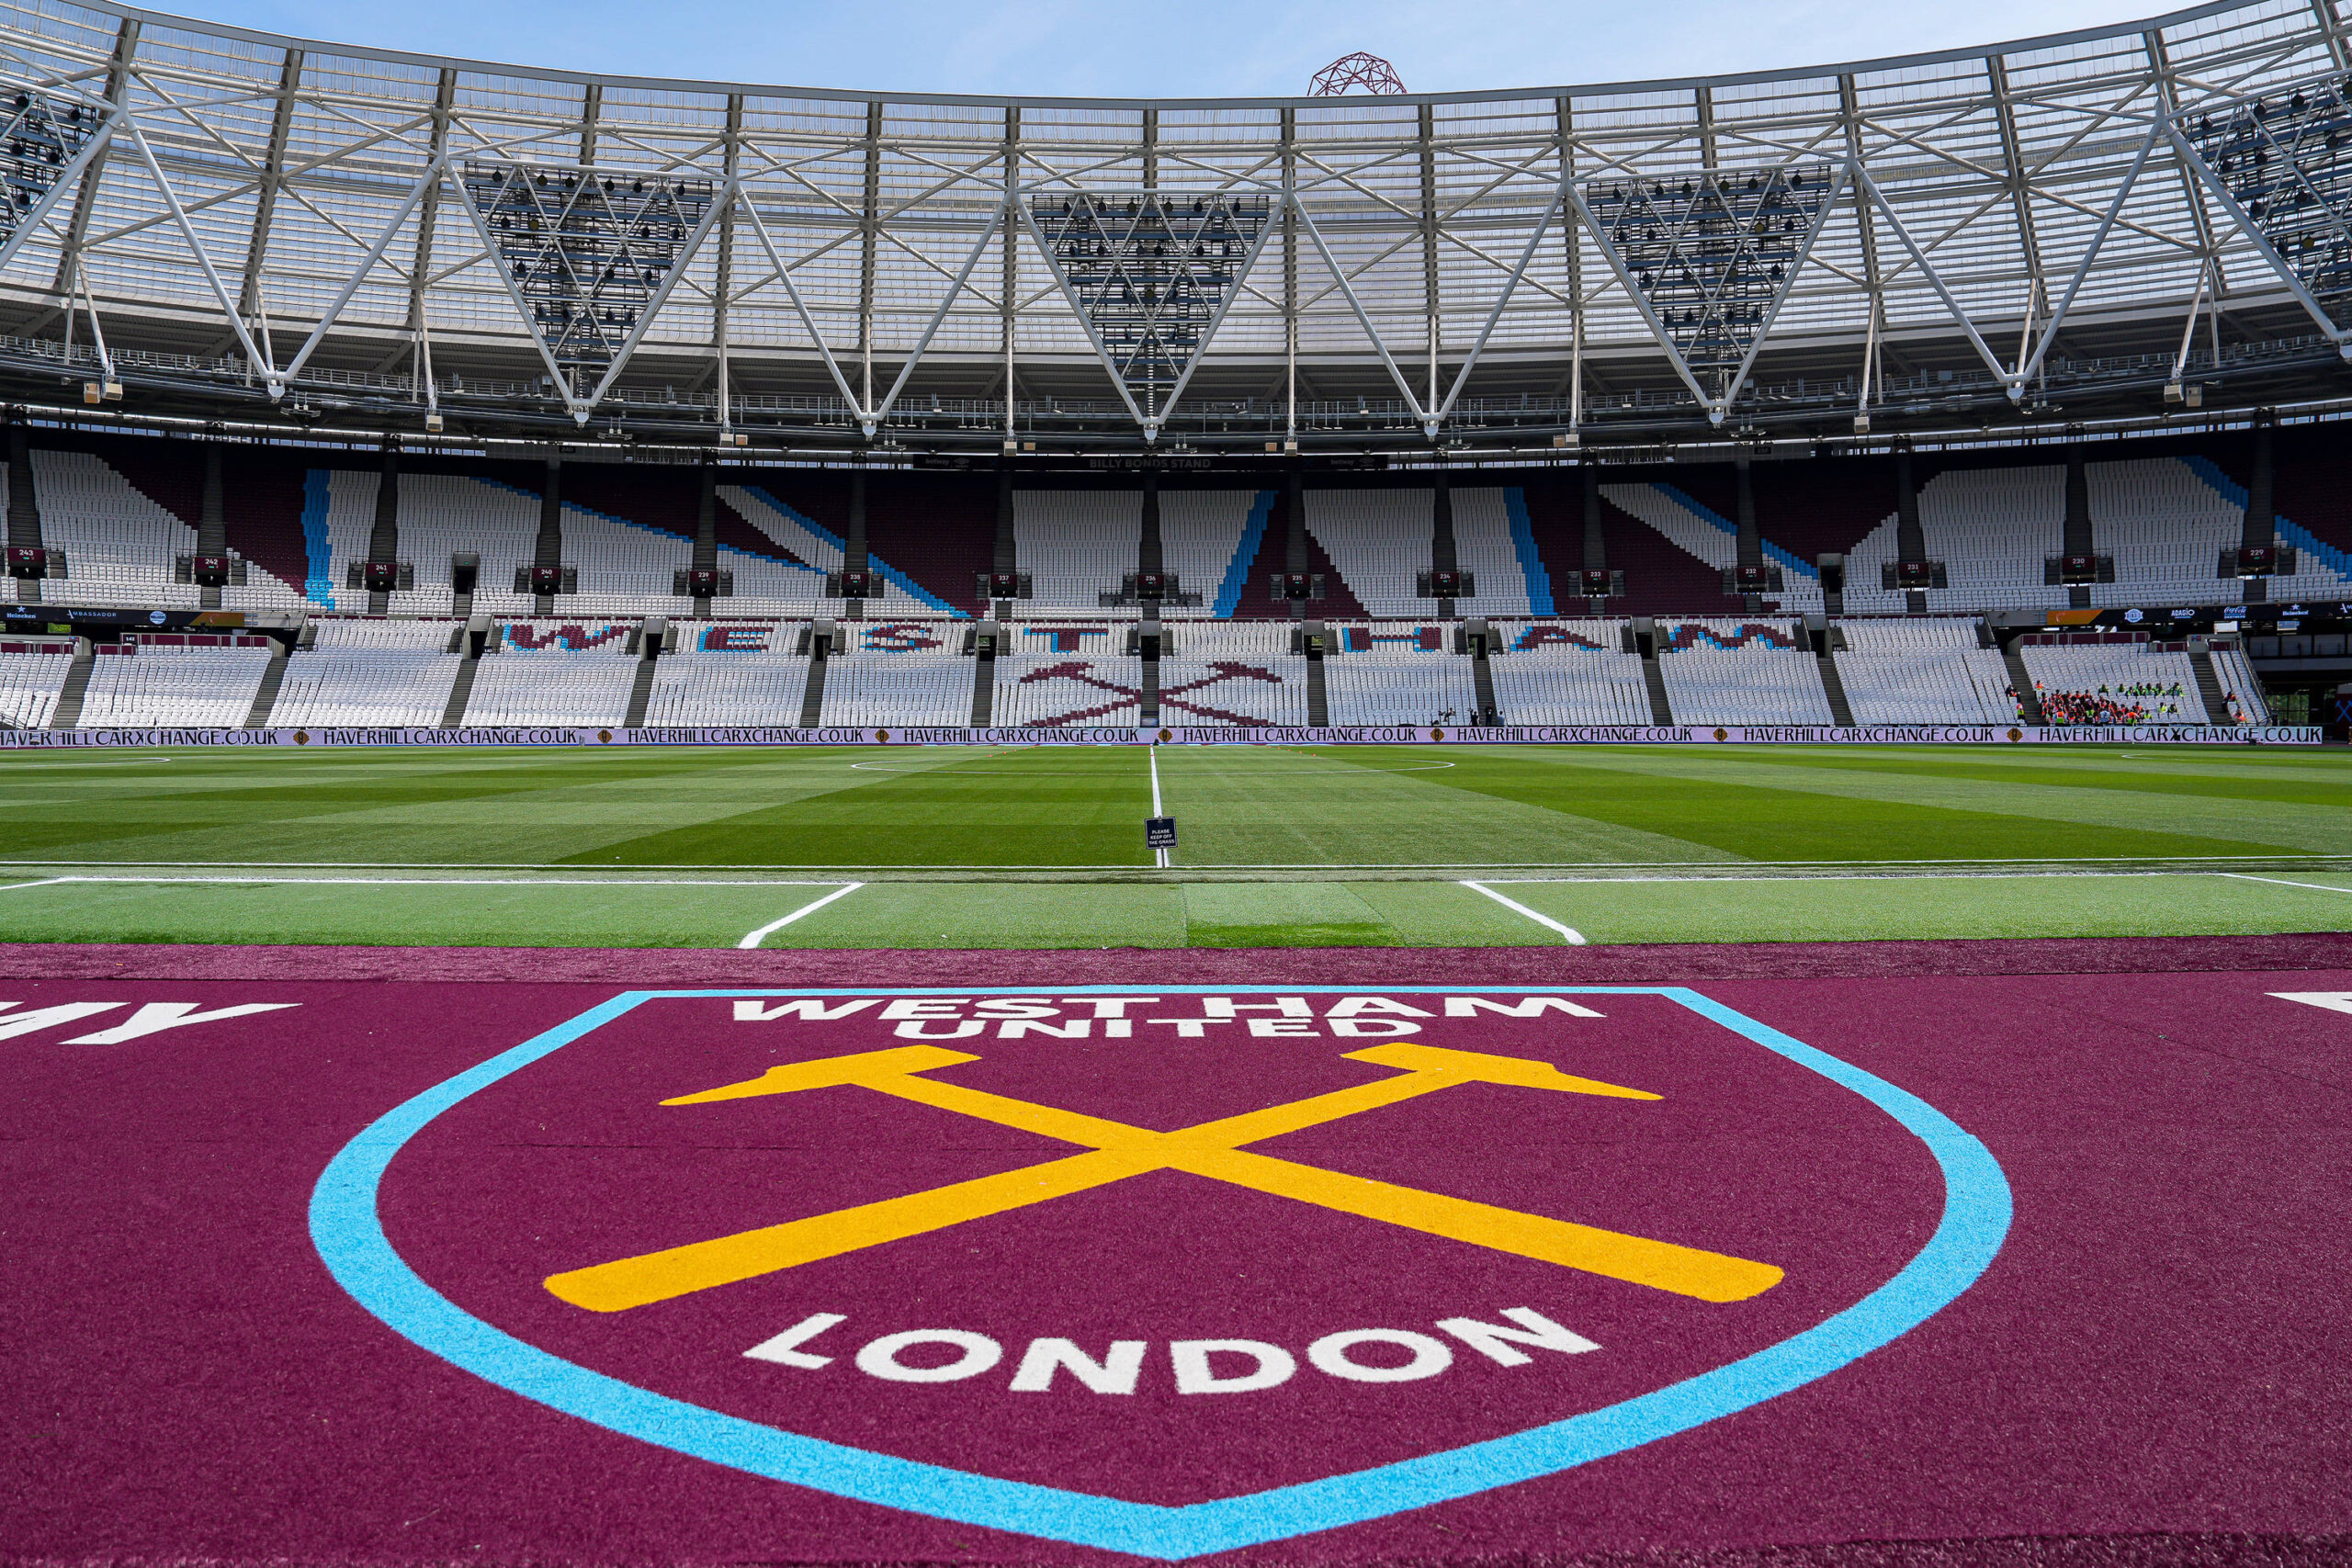 Image of the London Stadium showing the West Ham club badge on the ground of the entranceway